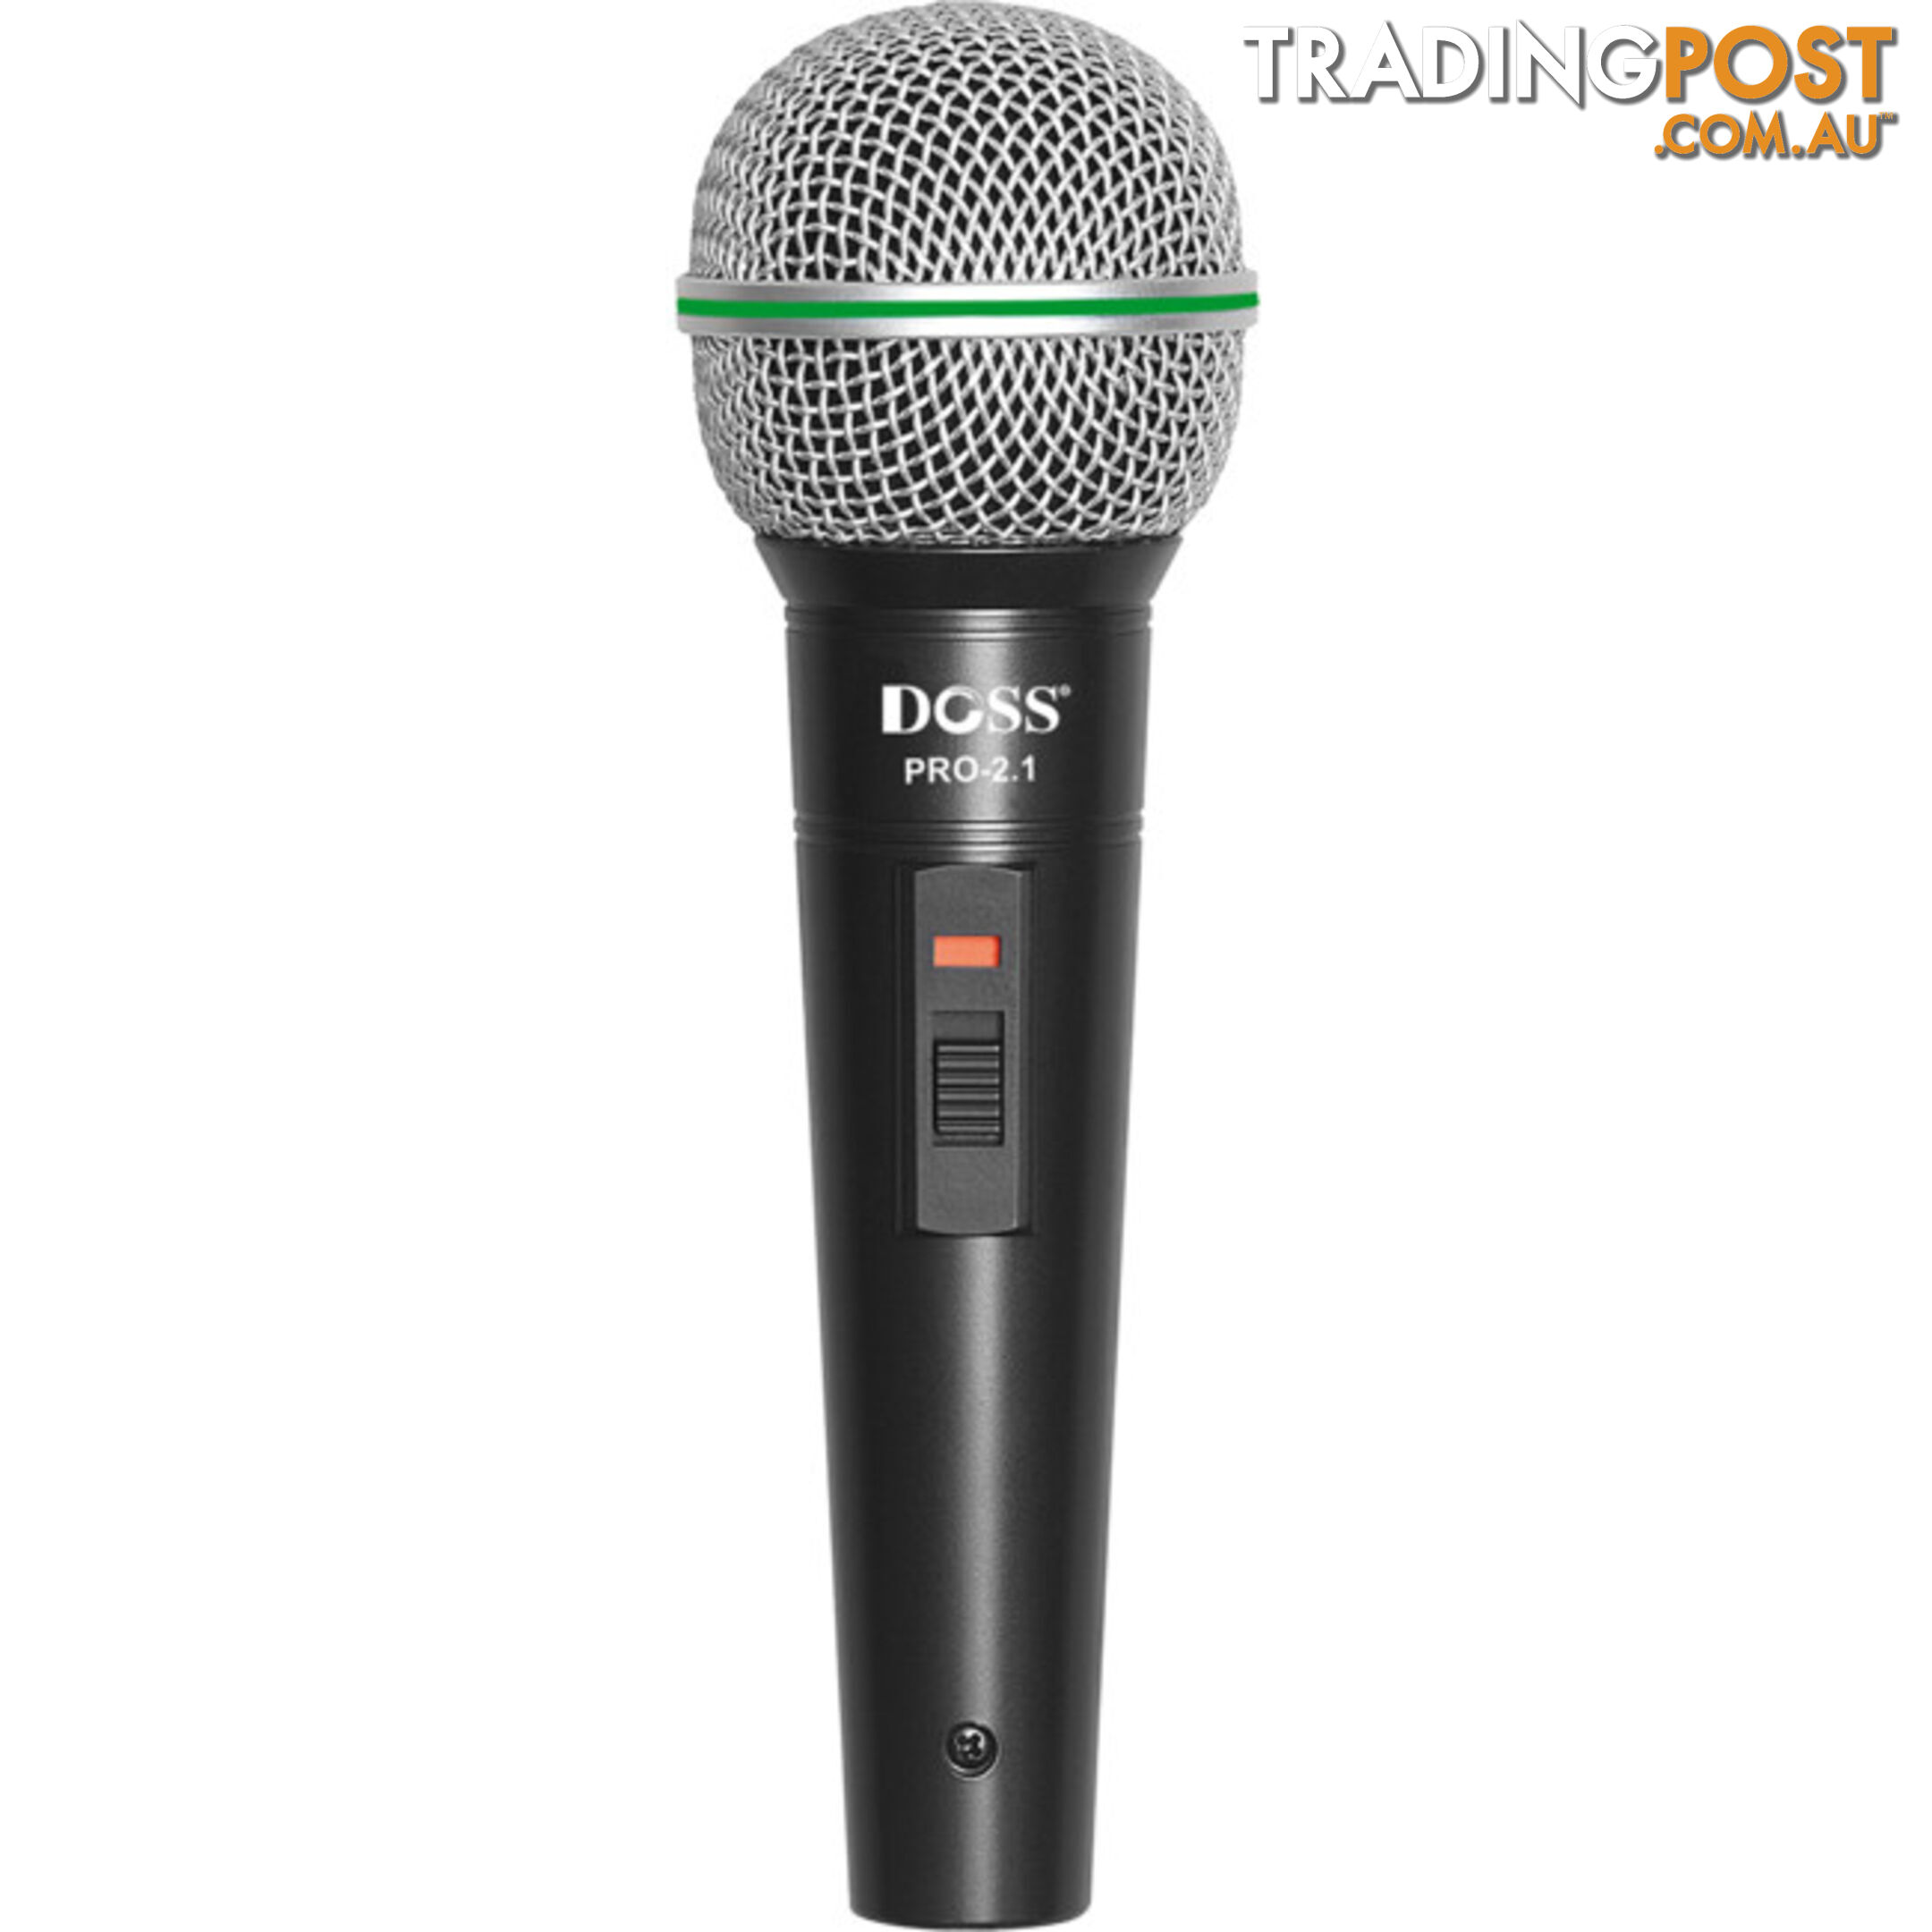 PRO2.1 DYNAMIC VOCAL MICROPHONE PROFESSIONAL DYNAMIC DOSS